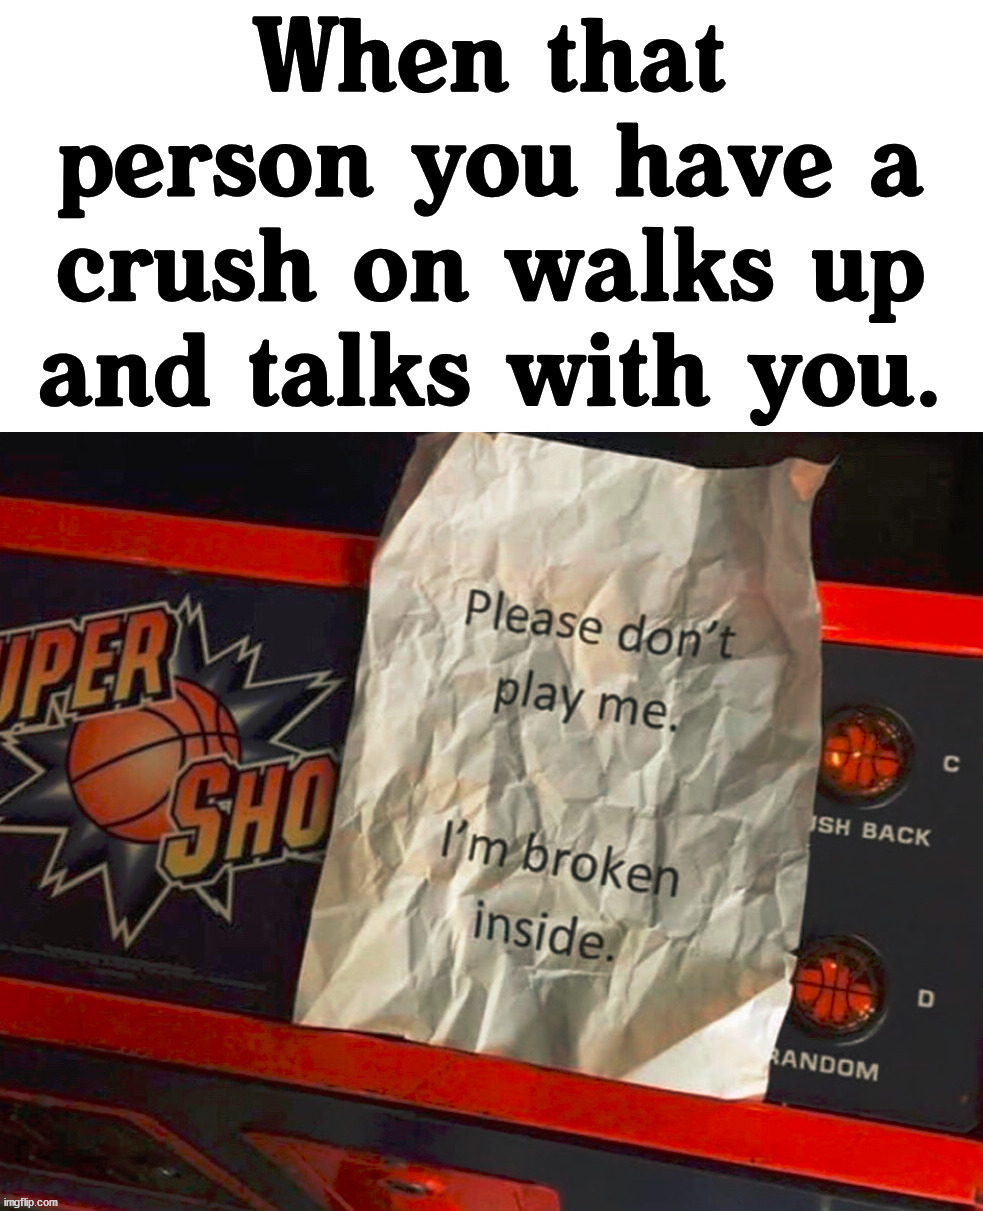 Be nice to one another. |  When that person you have a crush on walks up and talks with you. | image tagged in broken,crush,i don't want to play with you anymore | made w/ Imgflip meme maker